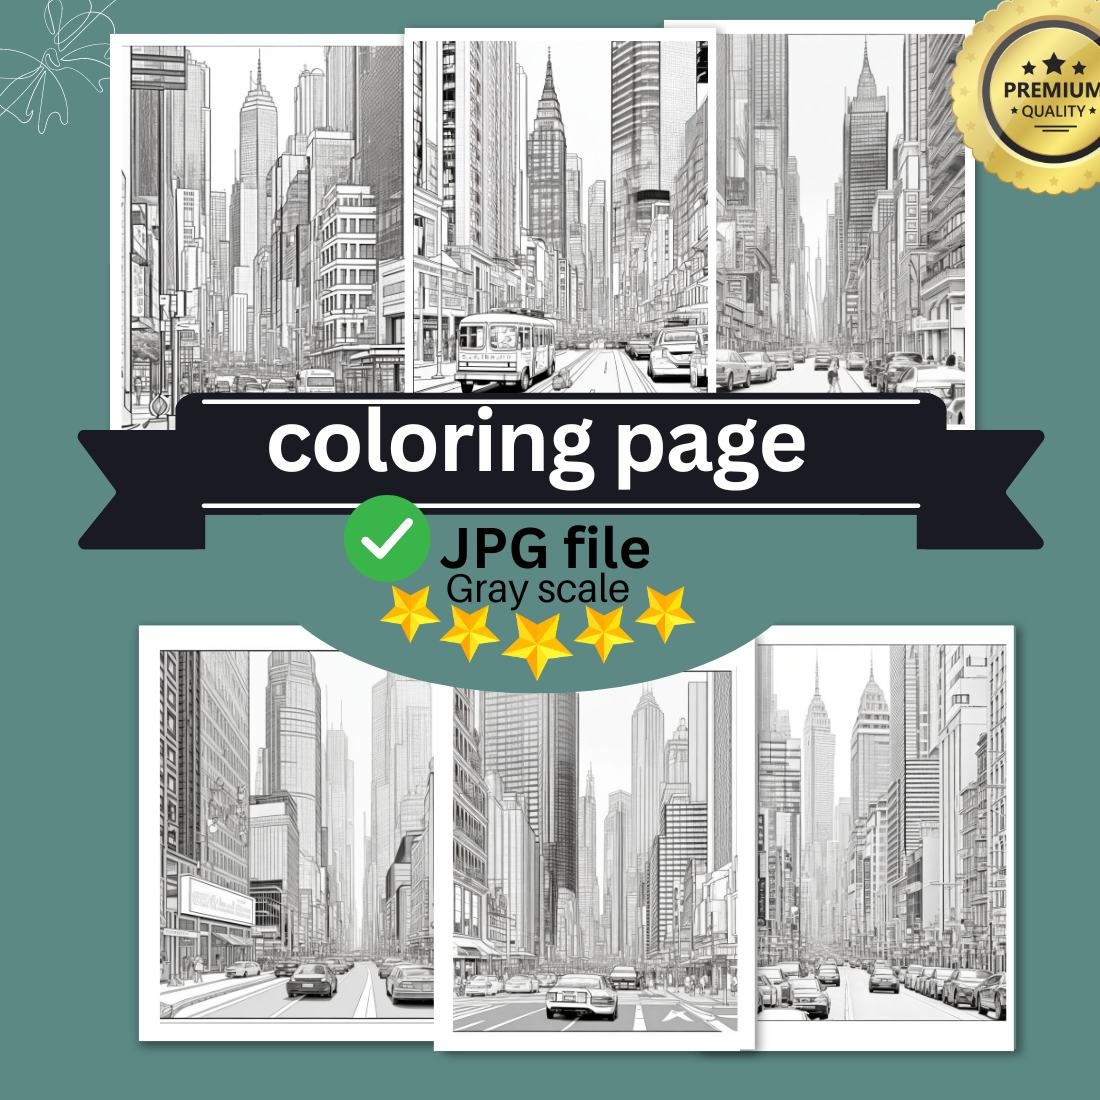 A cityscape with skyscrapers and a busy street scene coloring page 6 cover image.